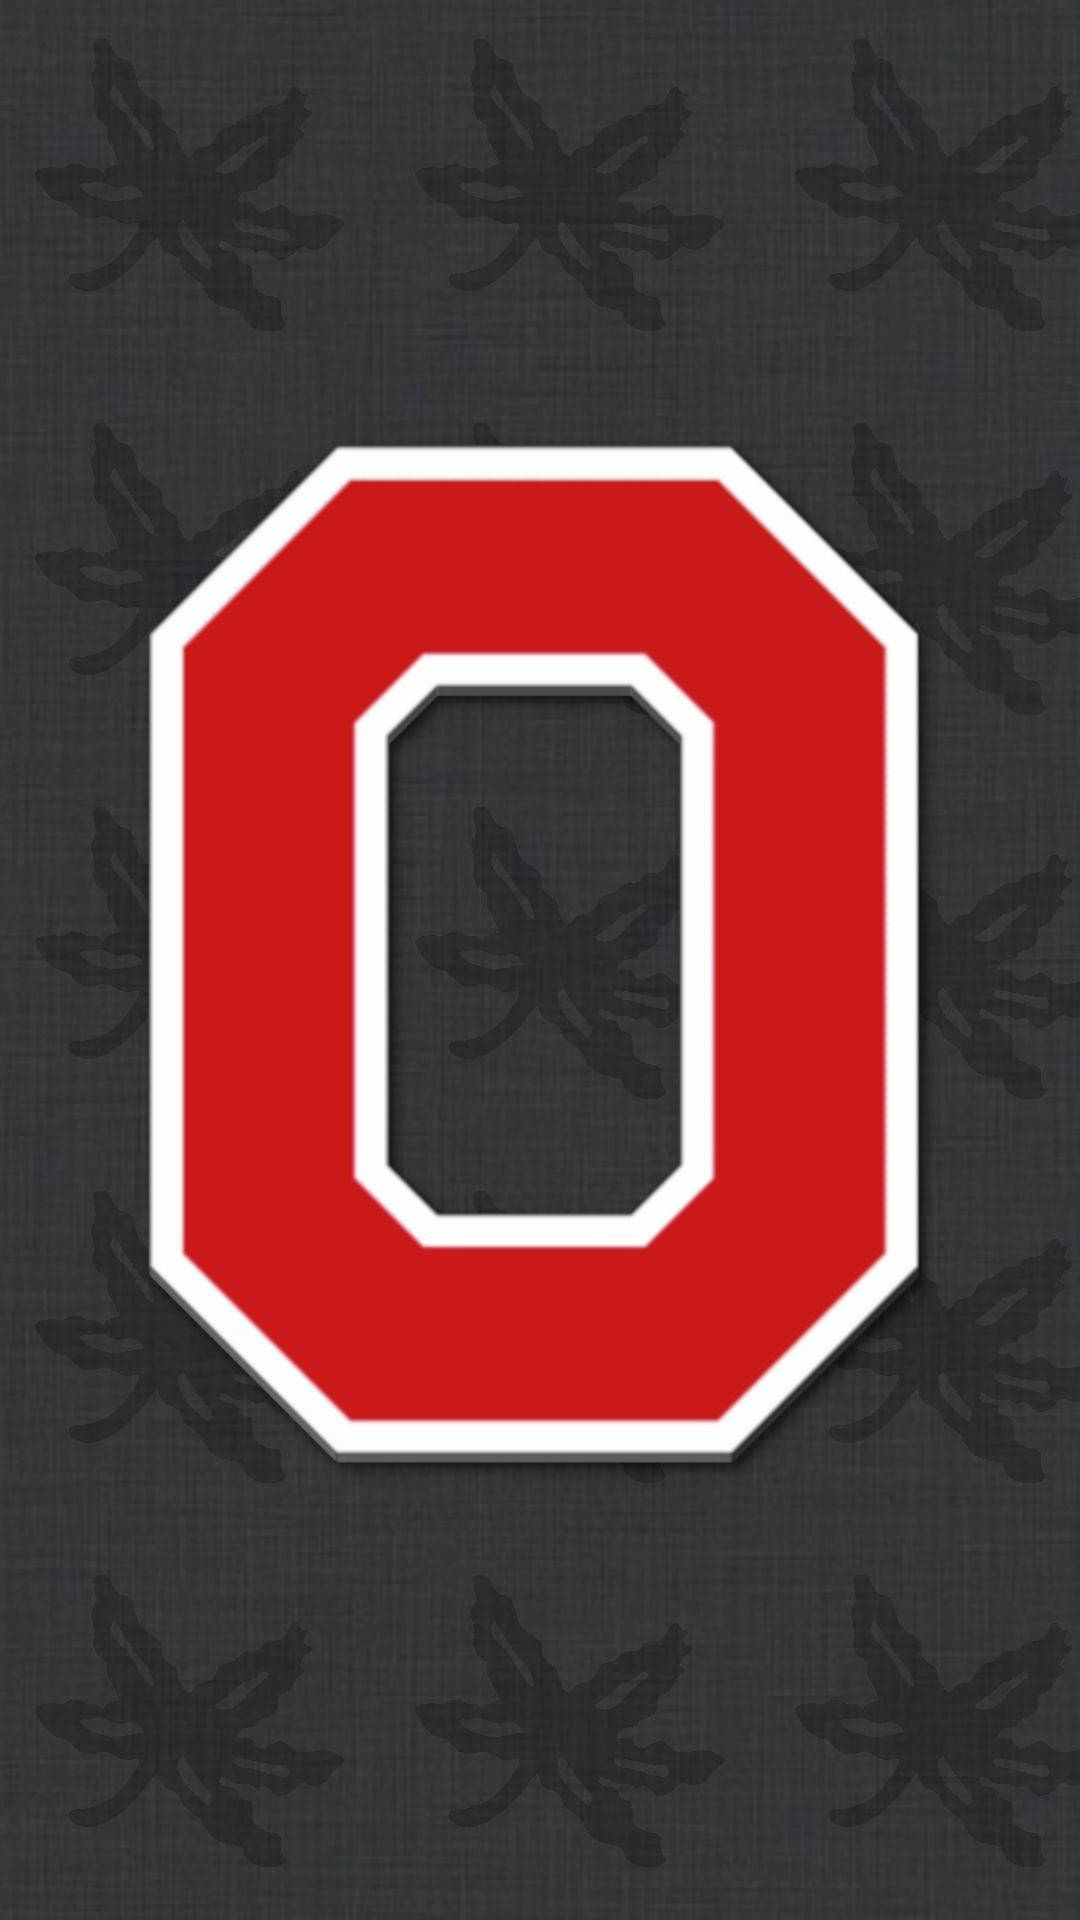 Ohio State Buckeyes Letter Collage Wallpaper